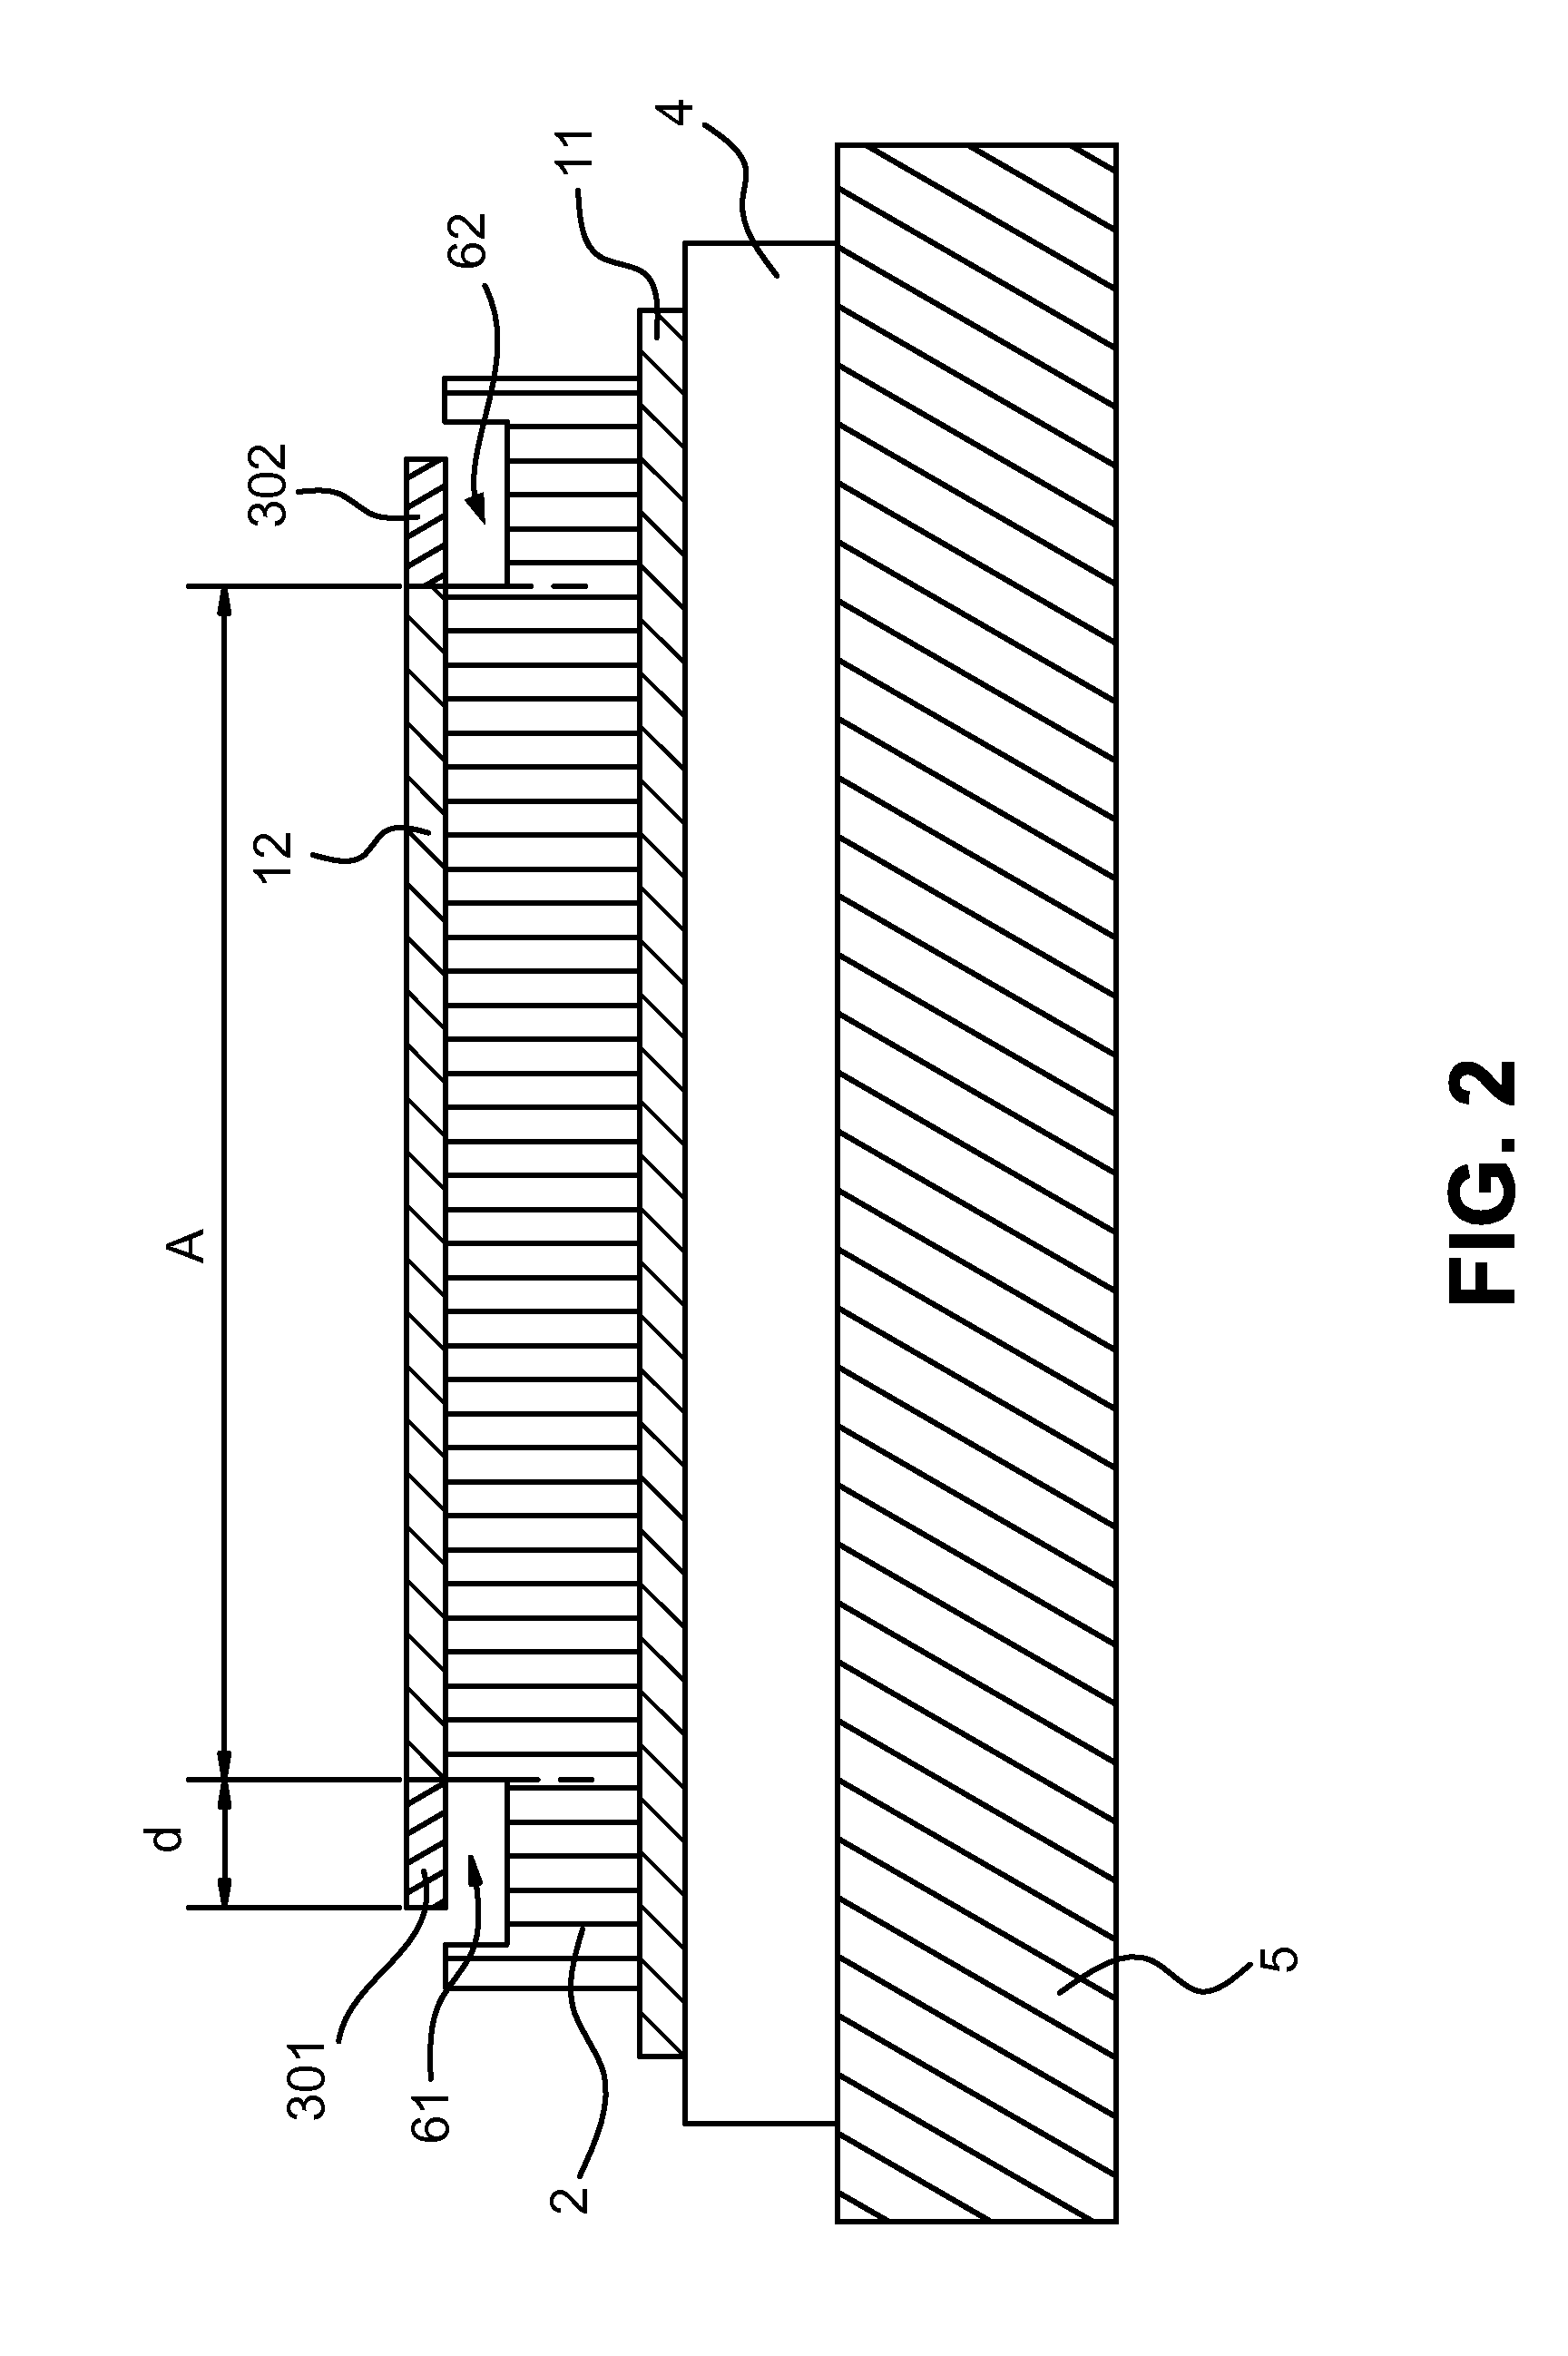 Piezoelectric resonator structure having an interference structure